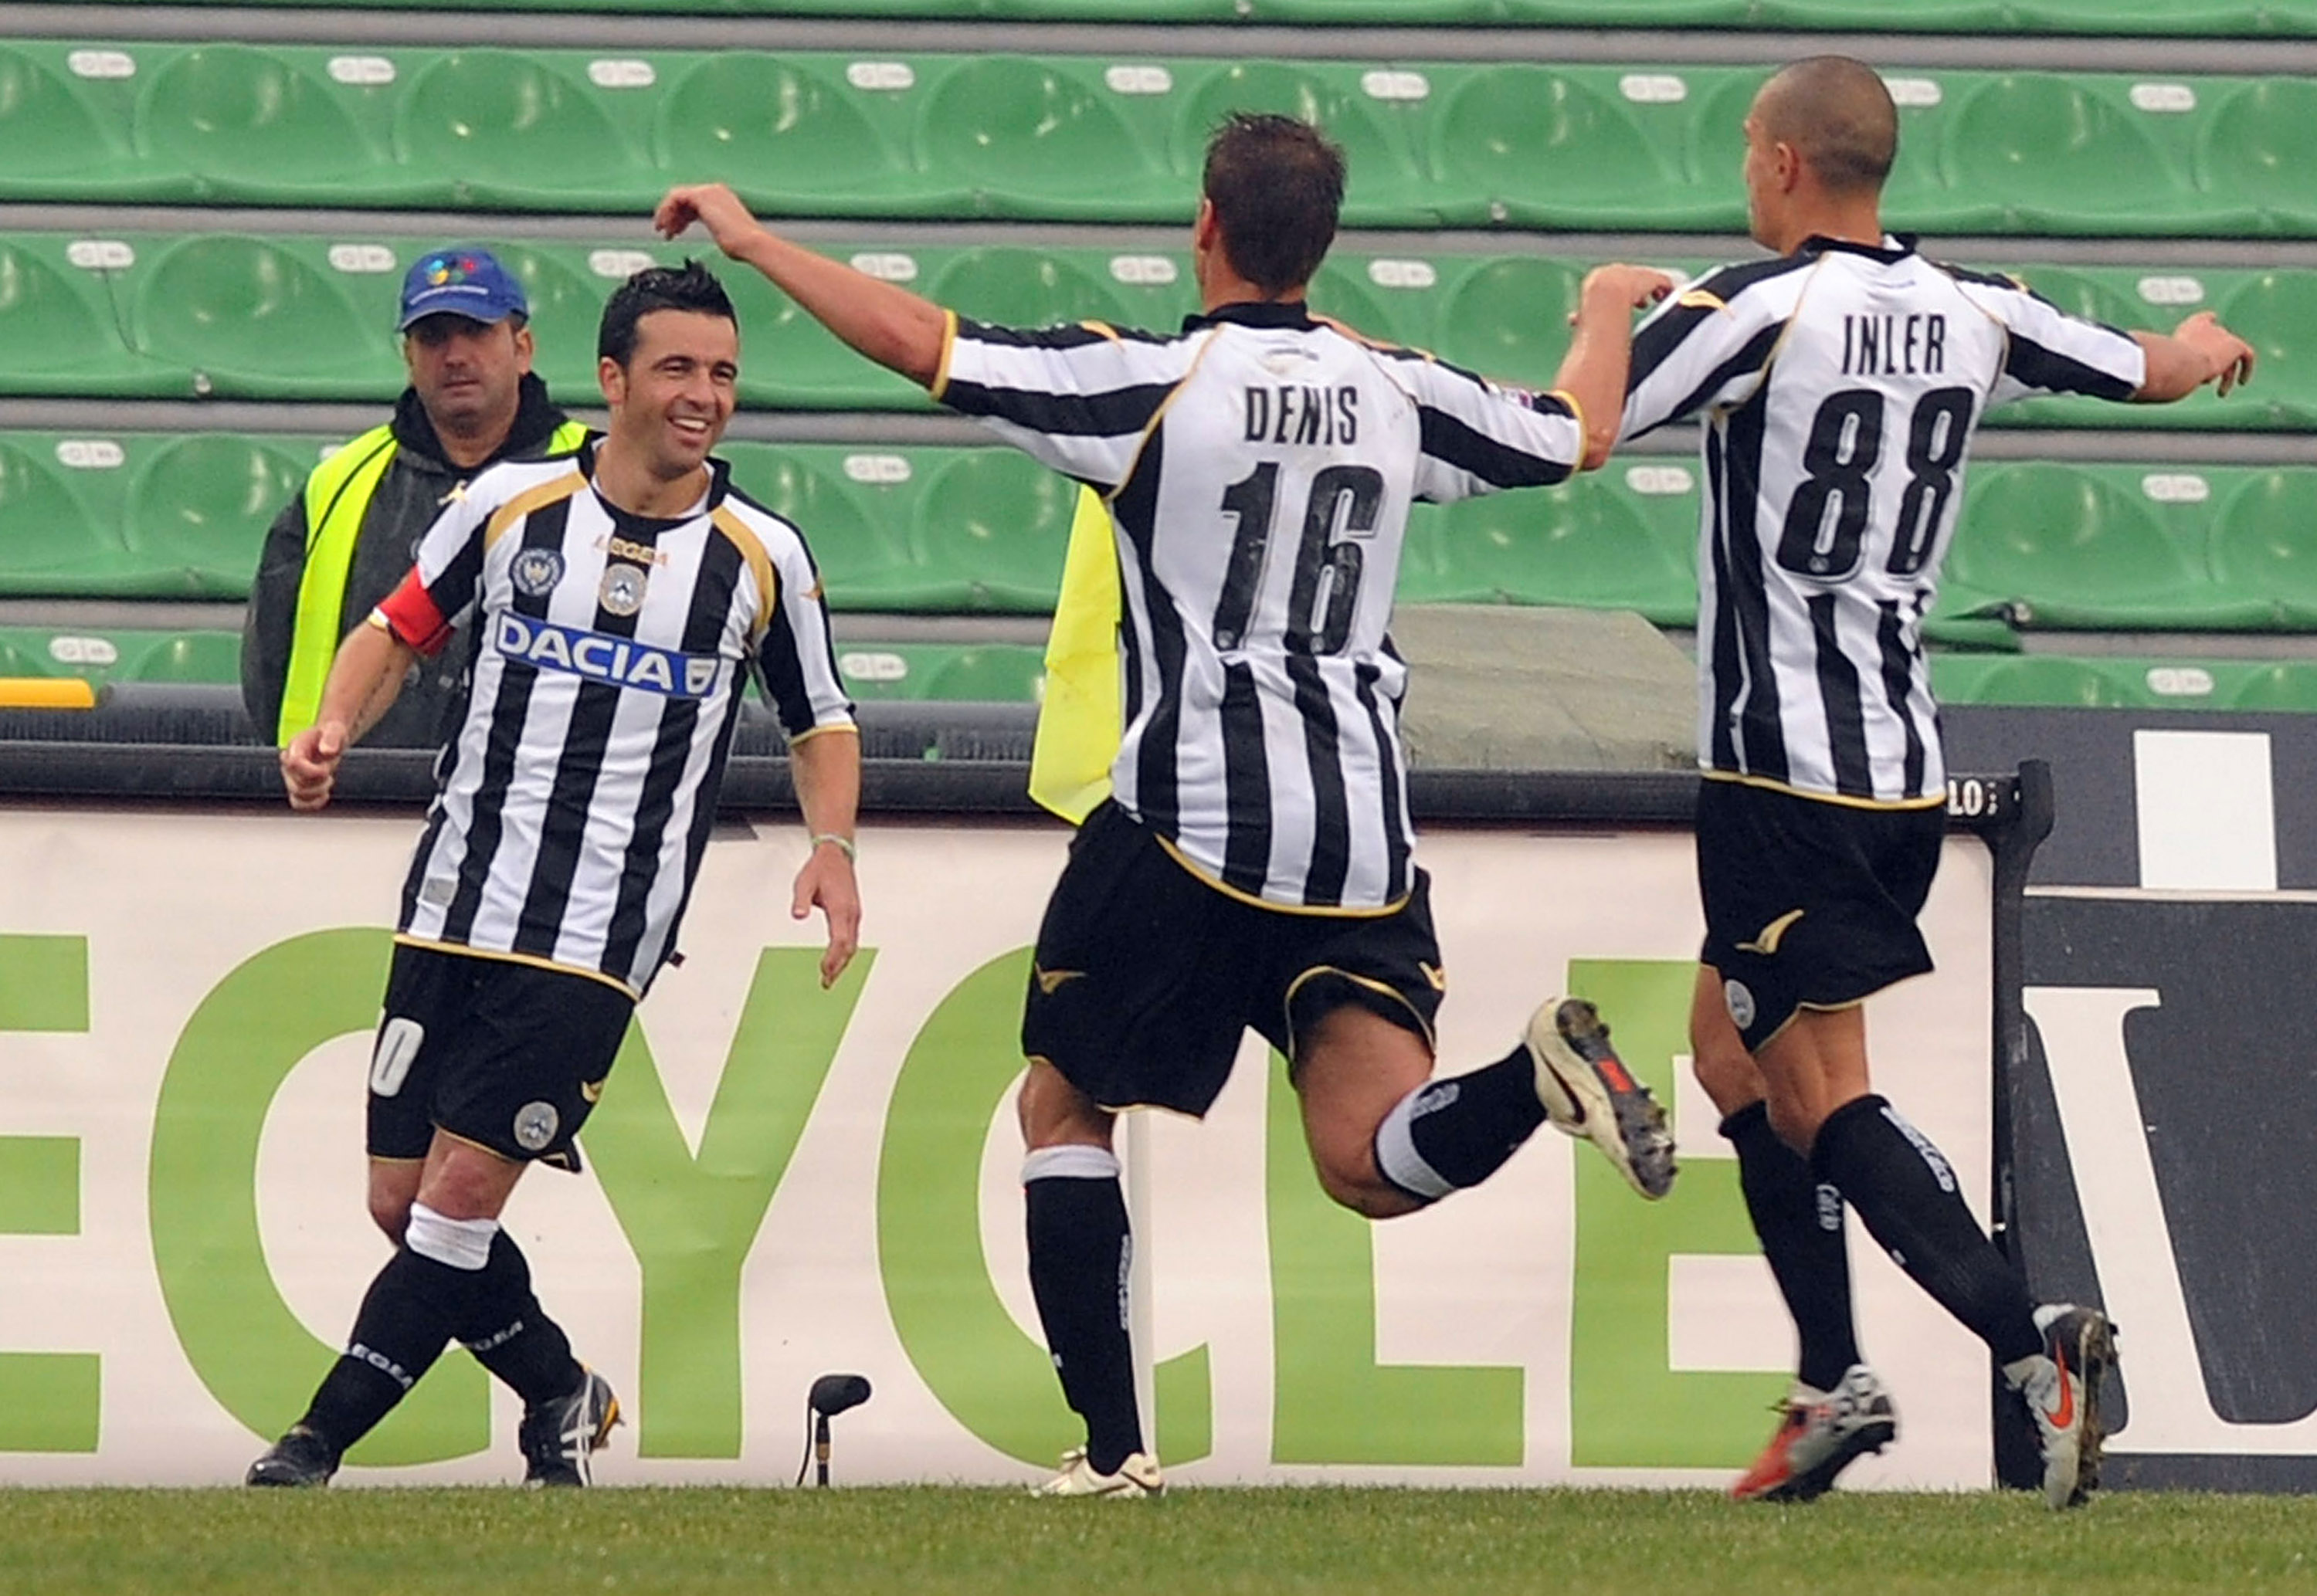 Teammates come to celebrate with Antonio Di Natale, who helped Udinese in a 2-1 win over Palermo.